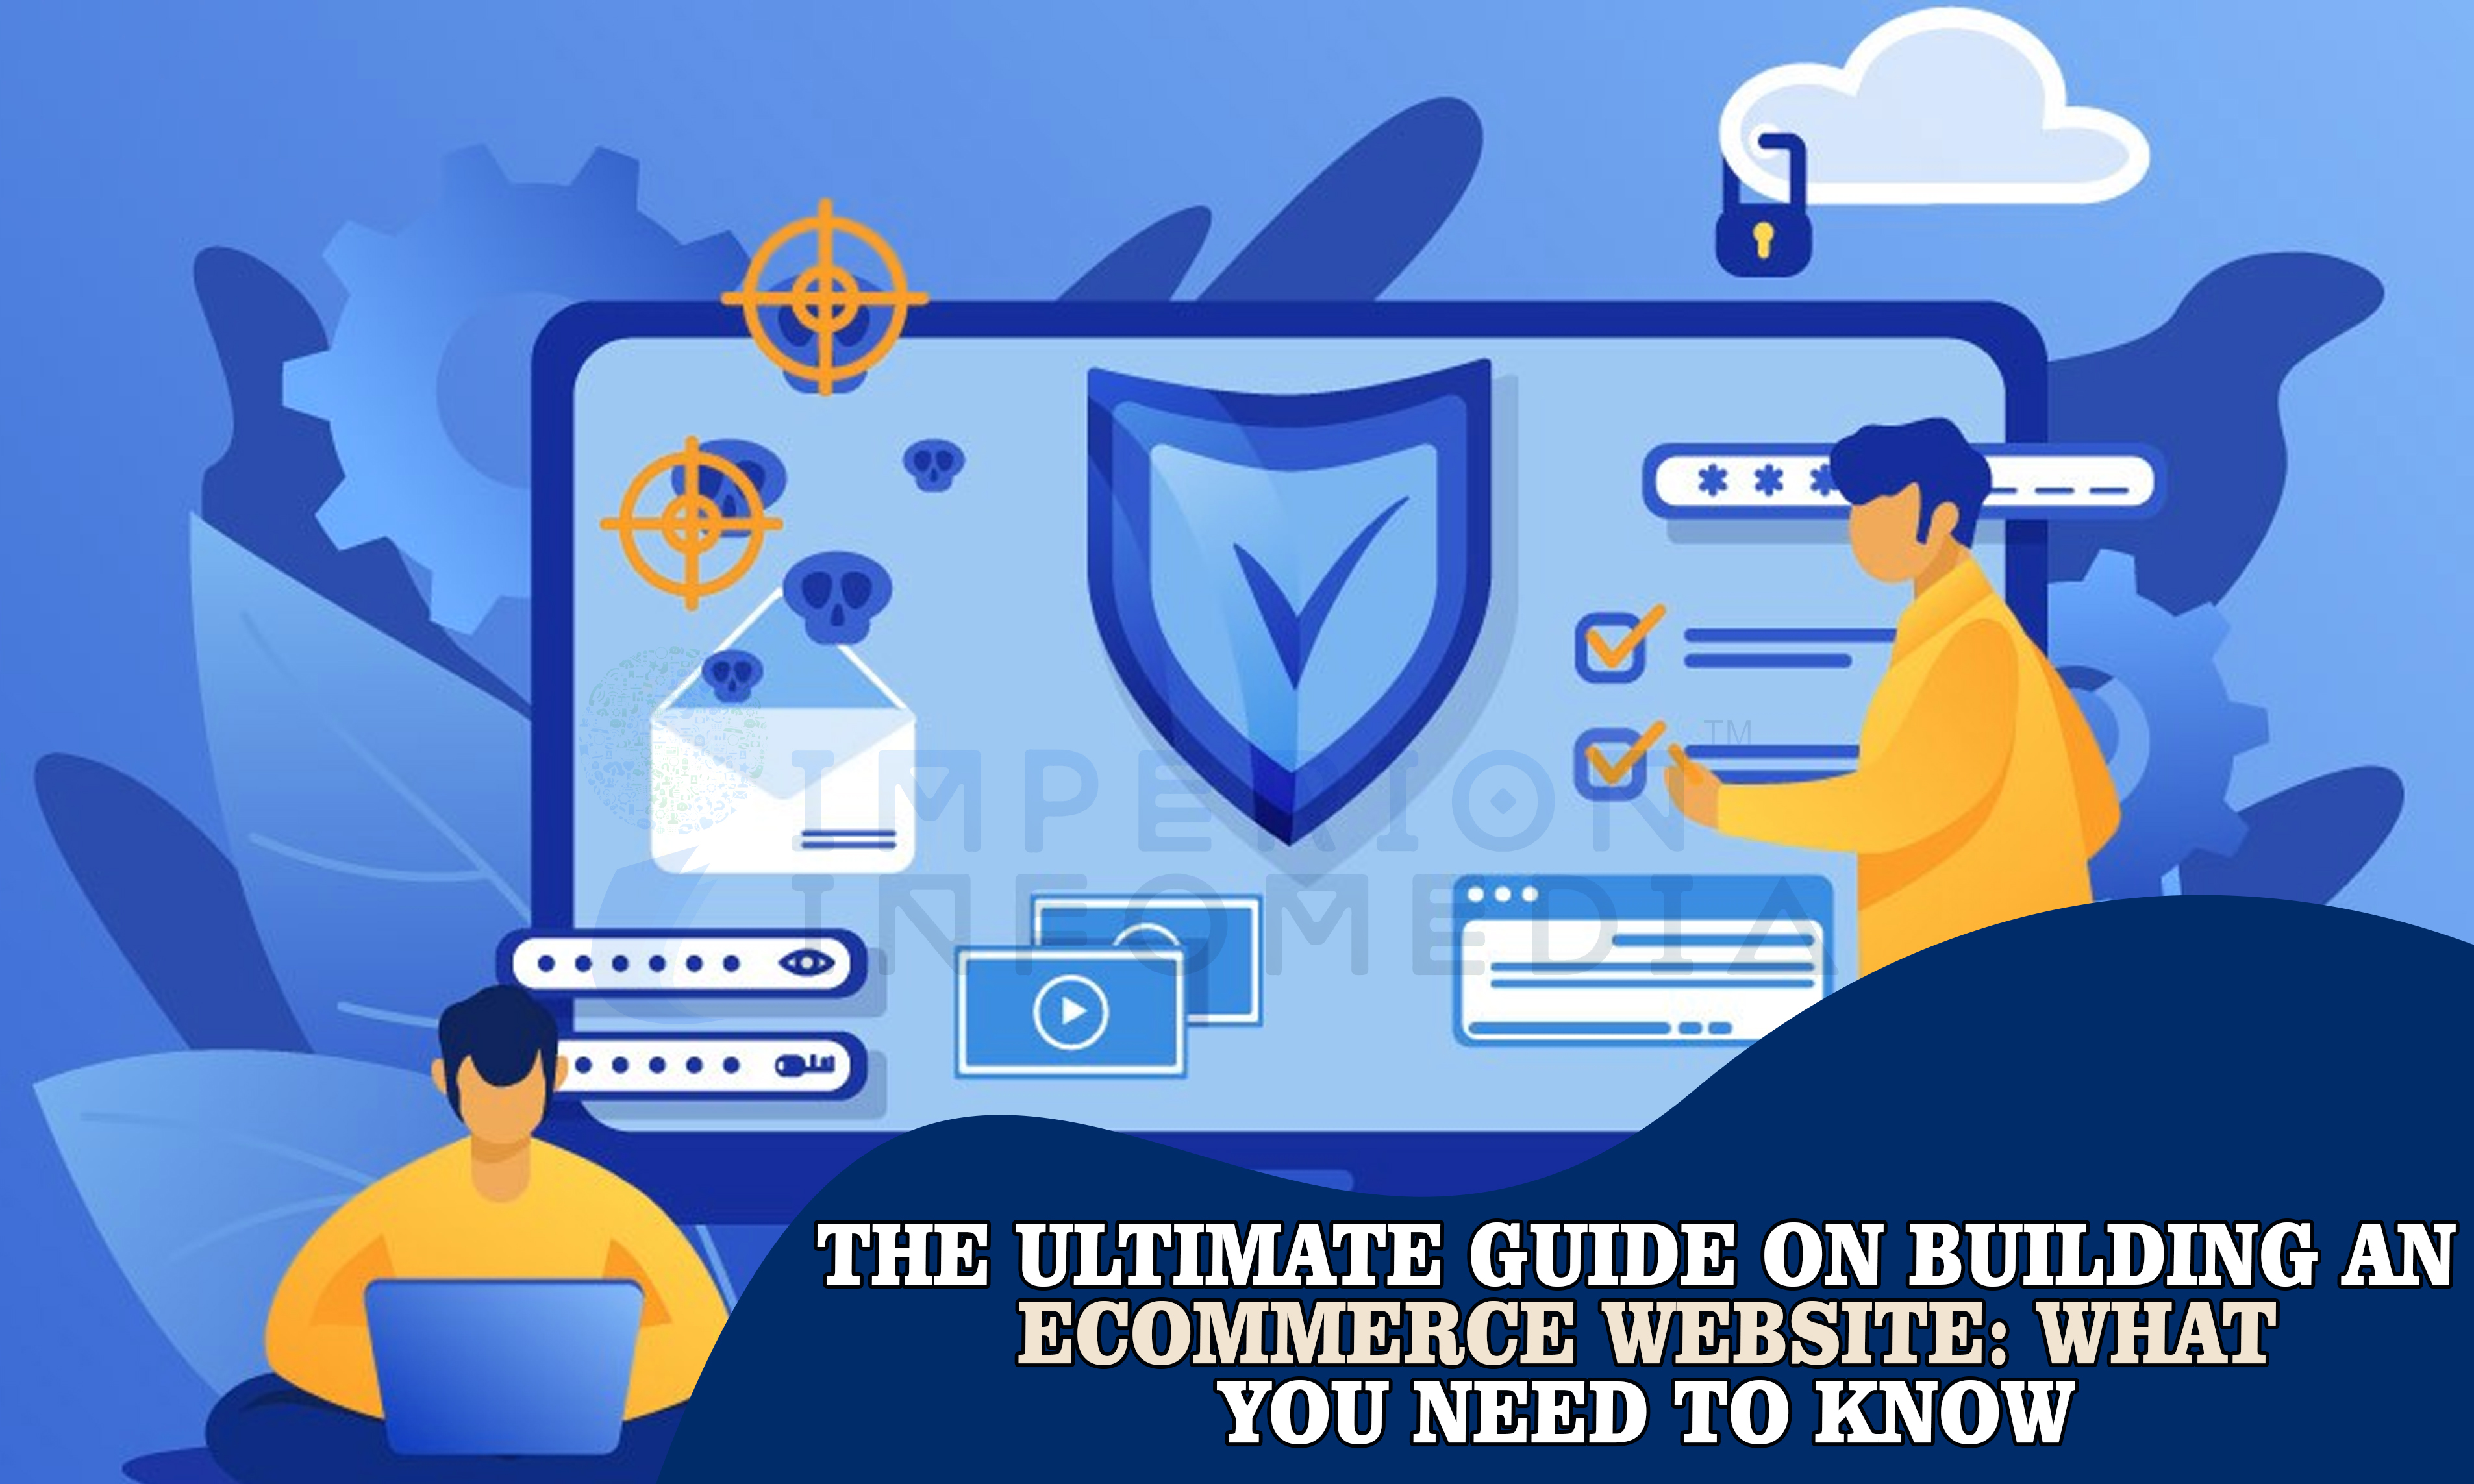 The Ultimate Guide on Building an Ecommerce Website: What You Need to Know